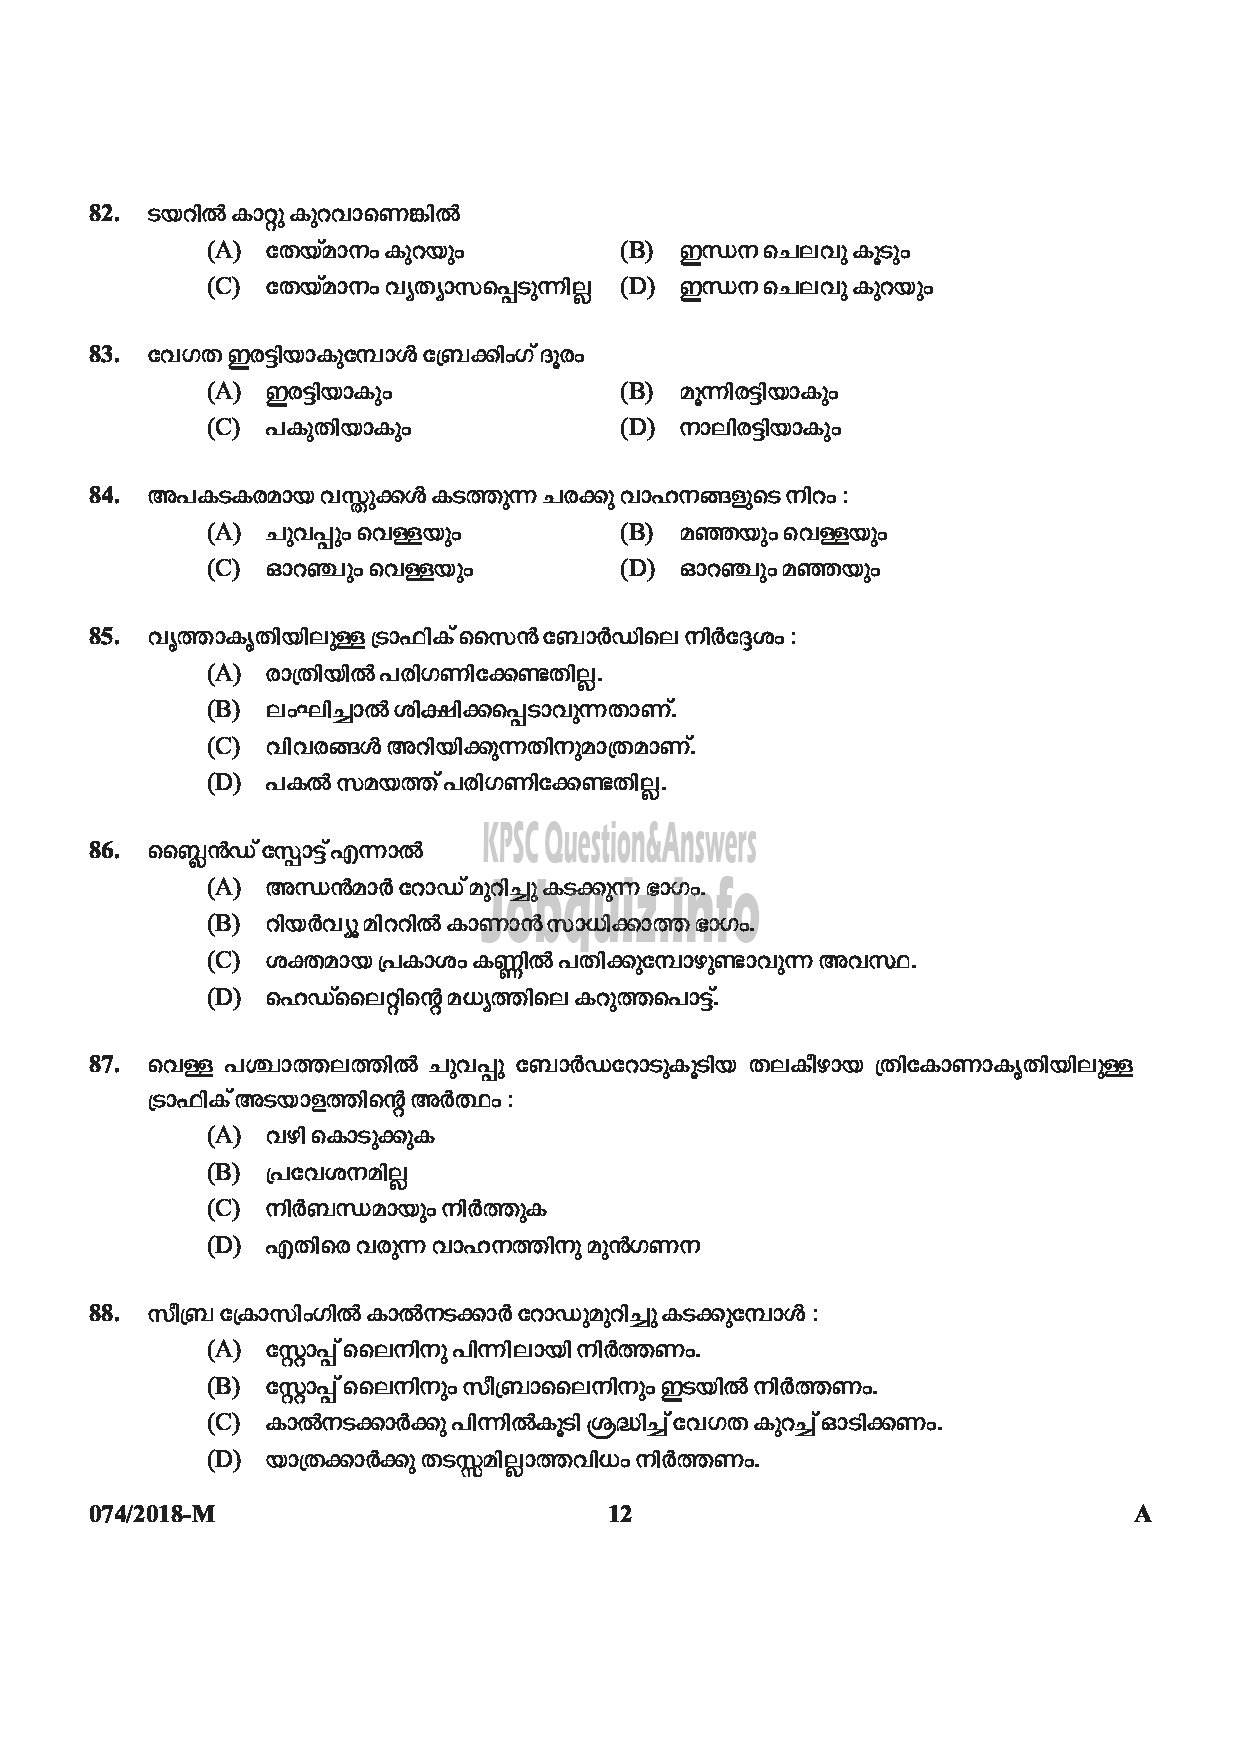 Kerala PSC Question Paper - POLICE CONSTABLE DRIVER ARMED POLICE BATTALION POLICE-12